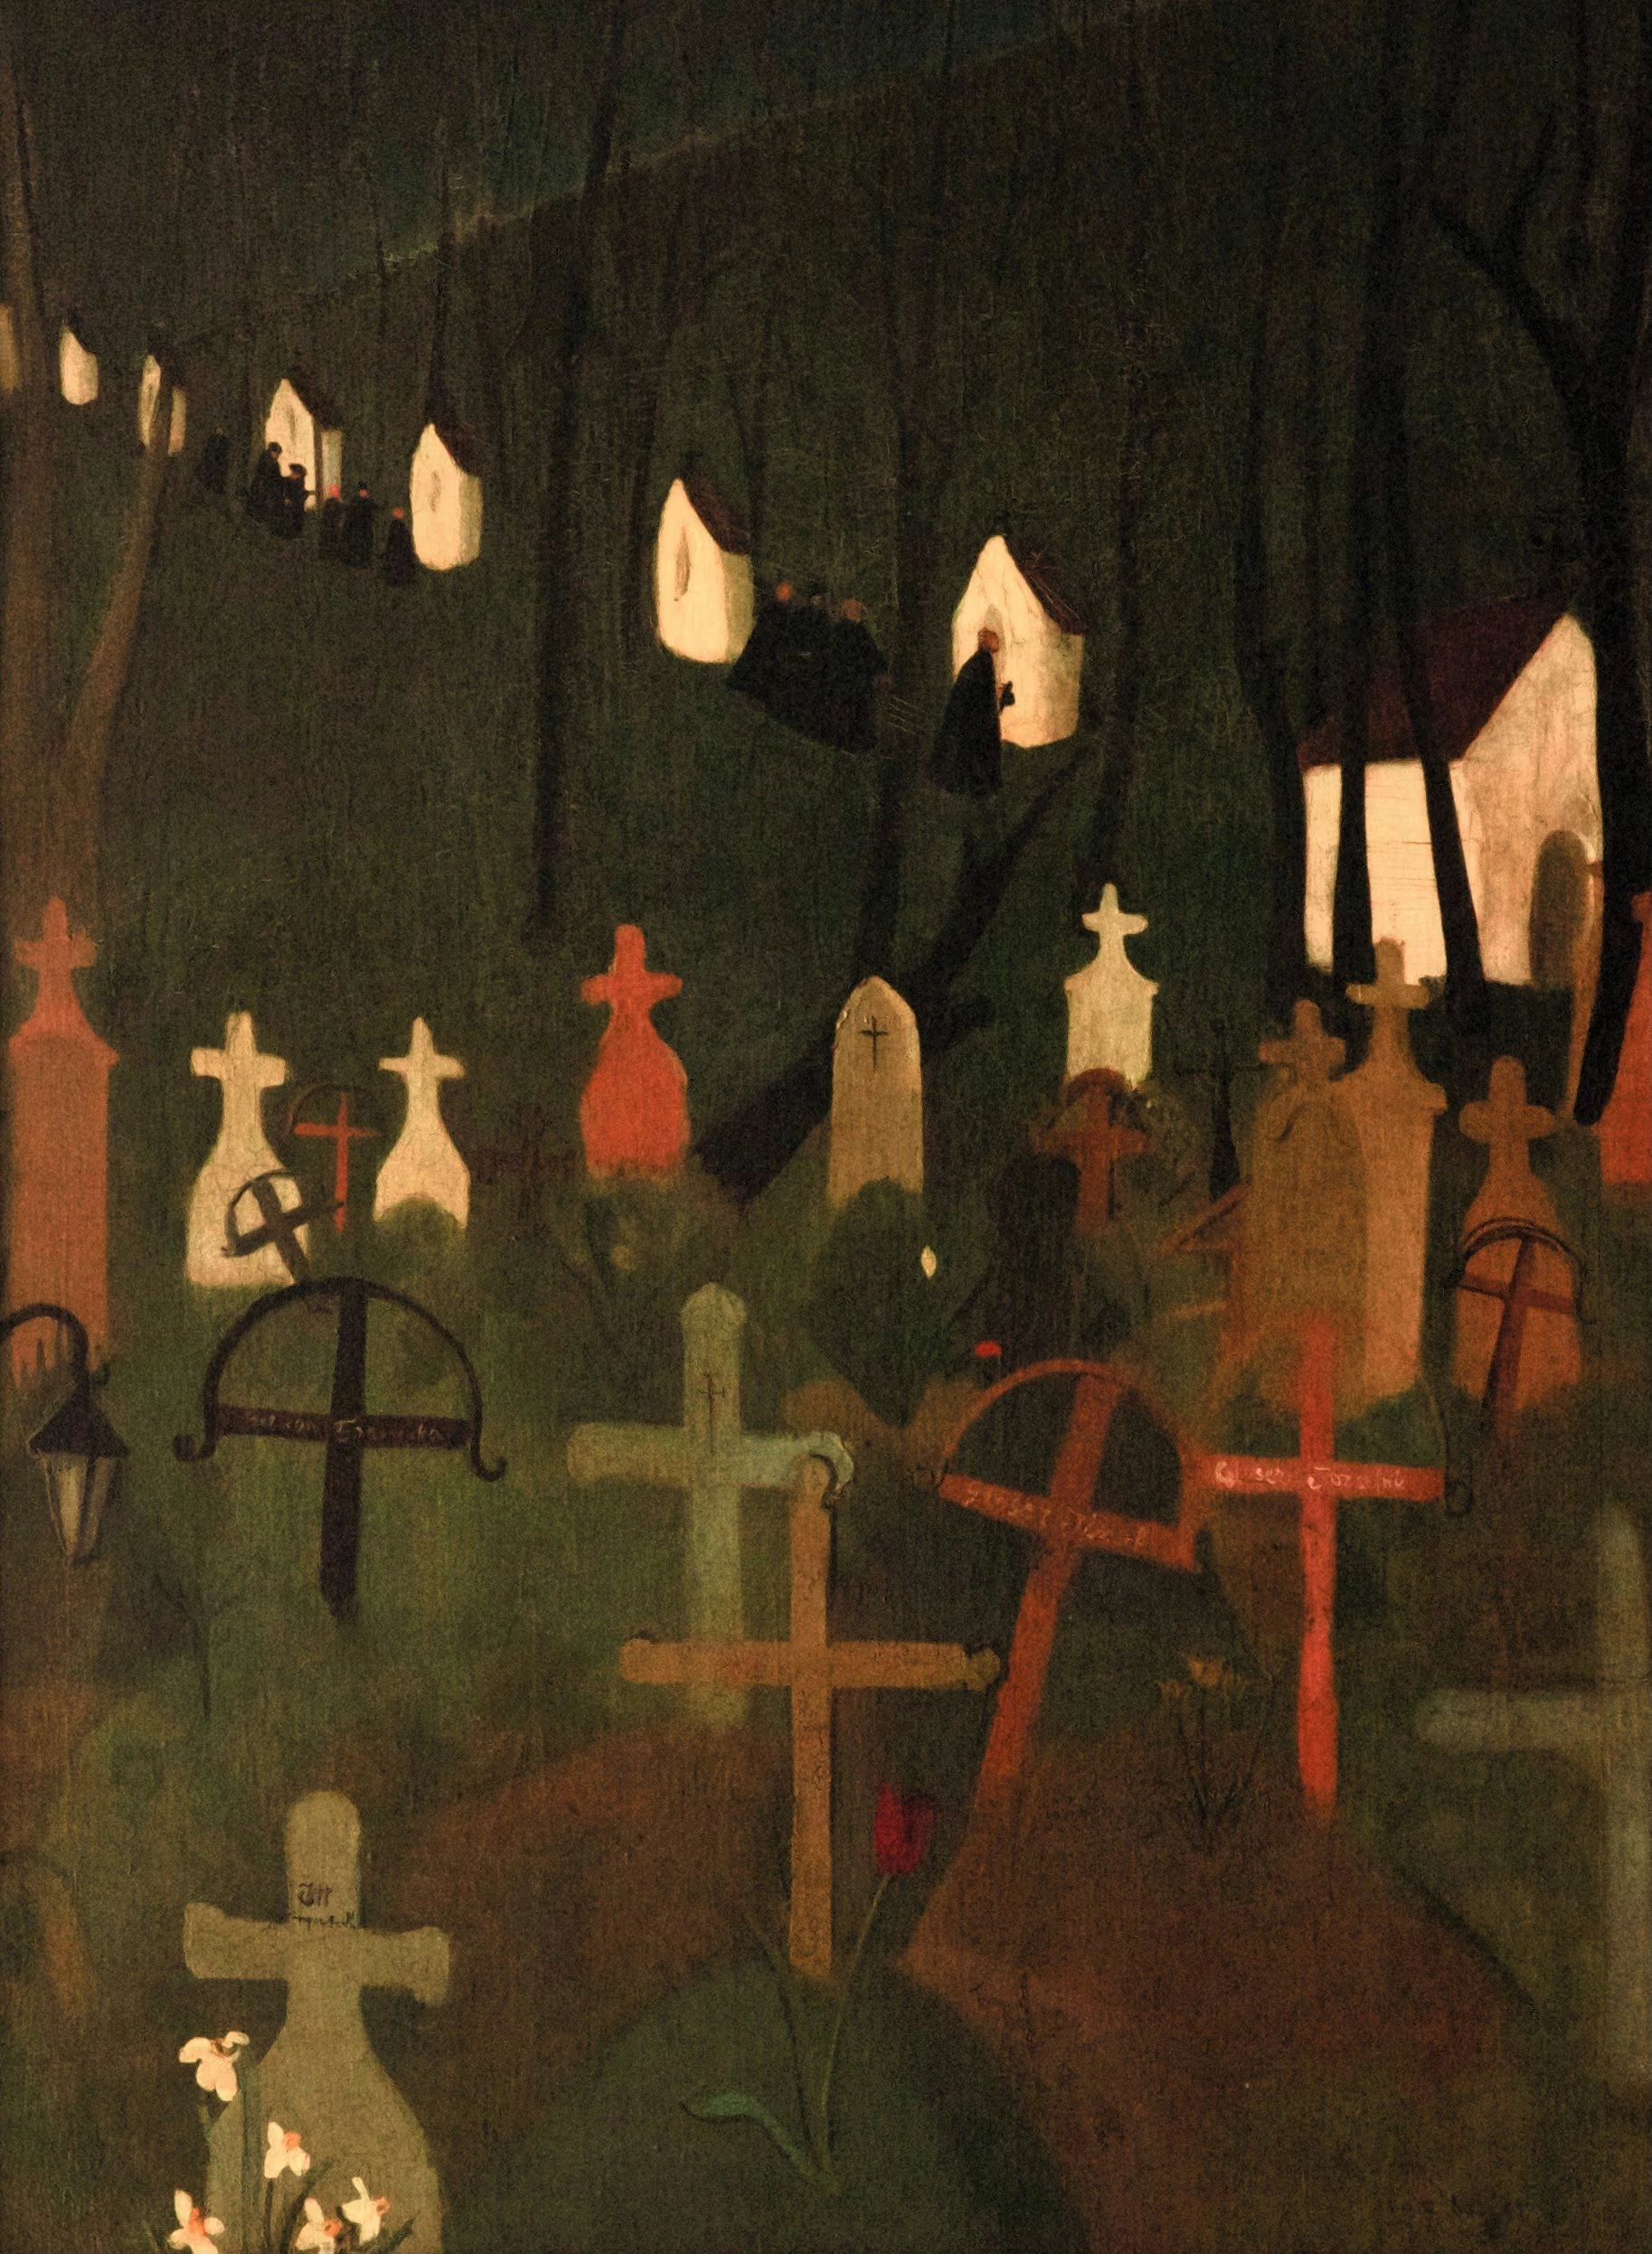 The Merry Cemetery, Amrita Sher-Gil